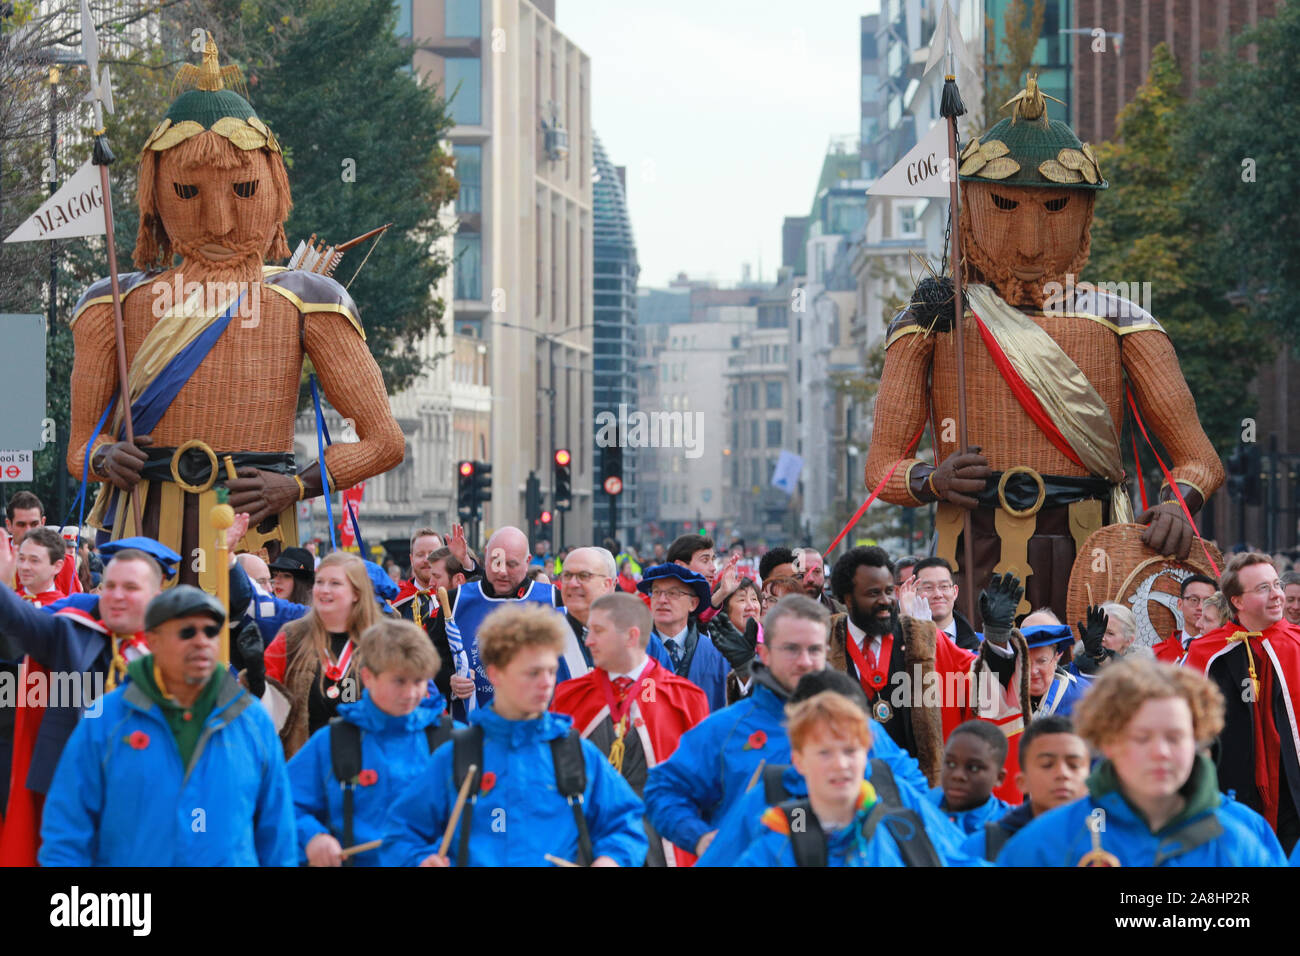 City of London, London, UK, 09th November 2019. Two large Gog & Magog figures with the Guild of Freemen proceed down the road at St Paul's. The annual Lord Mayor's Show, a parade through the City of London that is 804 years old and this year features over 6000 participants, sees marching bands, military detachments, carriages, dance troupes, inflatables and many others make their way from Mansion House, via St Paul's to the Royal Courts of Justice. Credit: Imageplotter/Alamy Live News Stock Photo